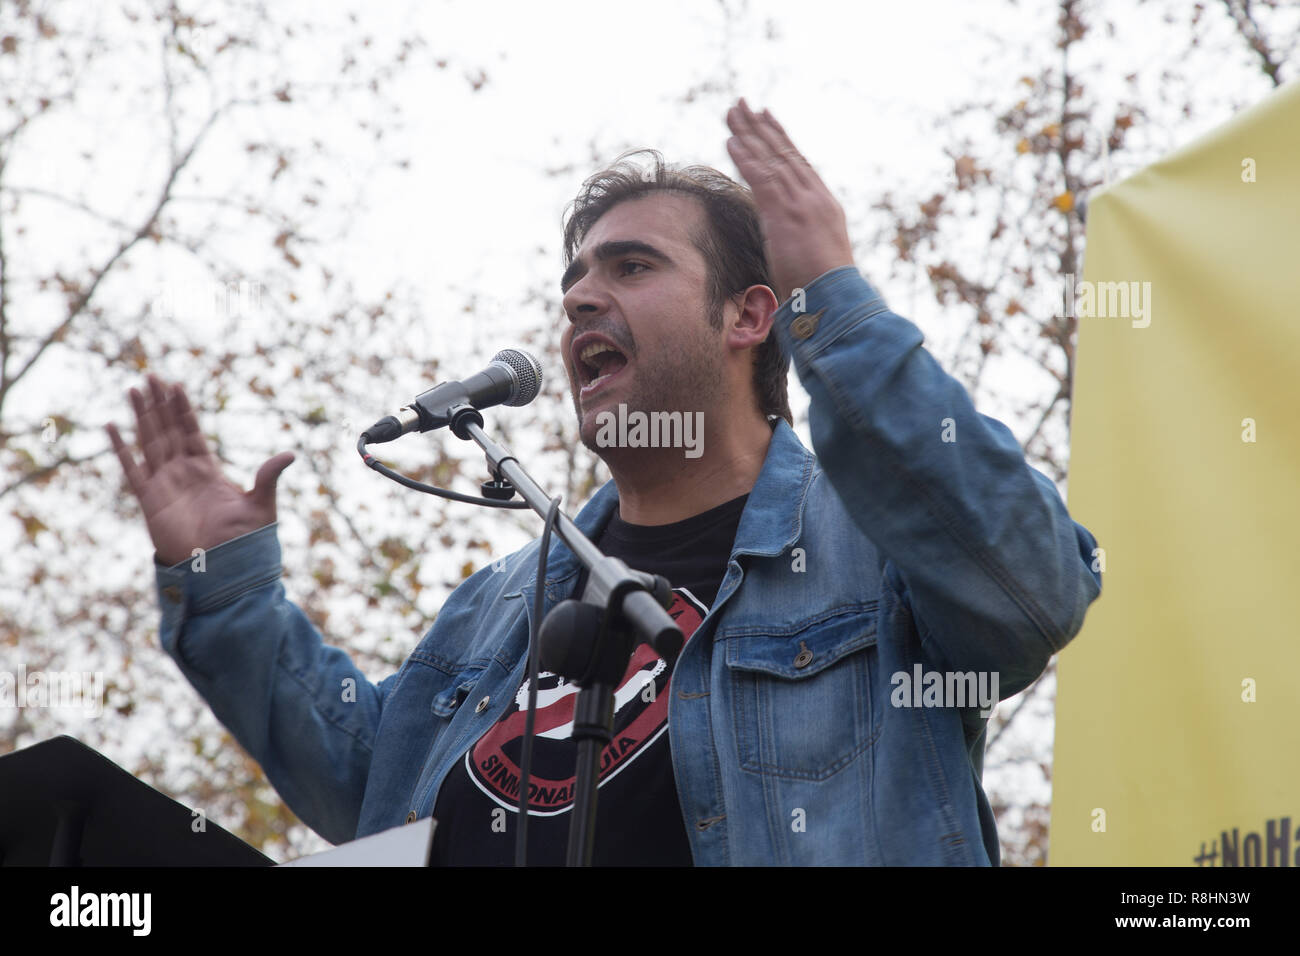 Madrid, Spain. 15th Dec, 2018. Oscar Reina, spokesperson of the Andalusian Trade Union of Workers (SAT) seen calling for the release of the Catalan political prisoners during the protest.Under the slogan ''There is no justice'' about 150 people protested in front of the Supreme Court to demand justice and freedom for the leaders of the independence movement in Catalonia imprisoned under Article 155 of the Spanish Constitution such as Oriol Junqueras, Jordi Turull, Raul Romeva, Joaquim Form, Jordi SÃ¡nchez or Jordi Cuixart, among many others. (Credit Image: © Lito Lizana/SOPA Images via Stock Photo